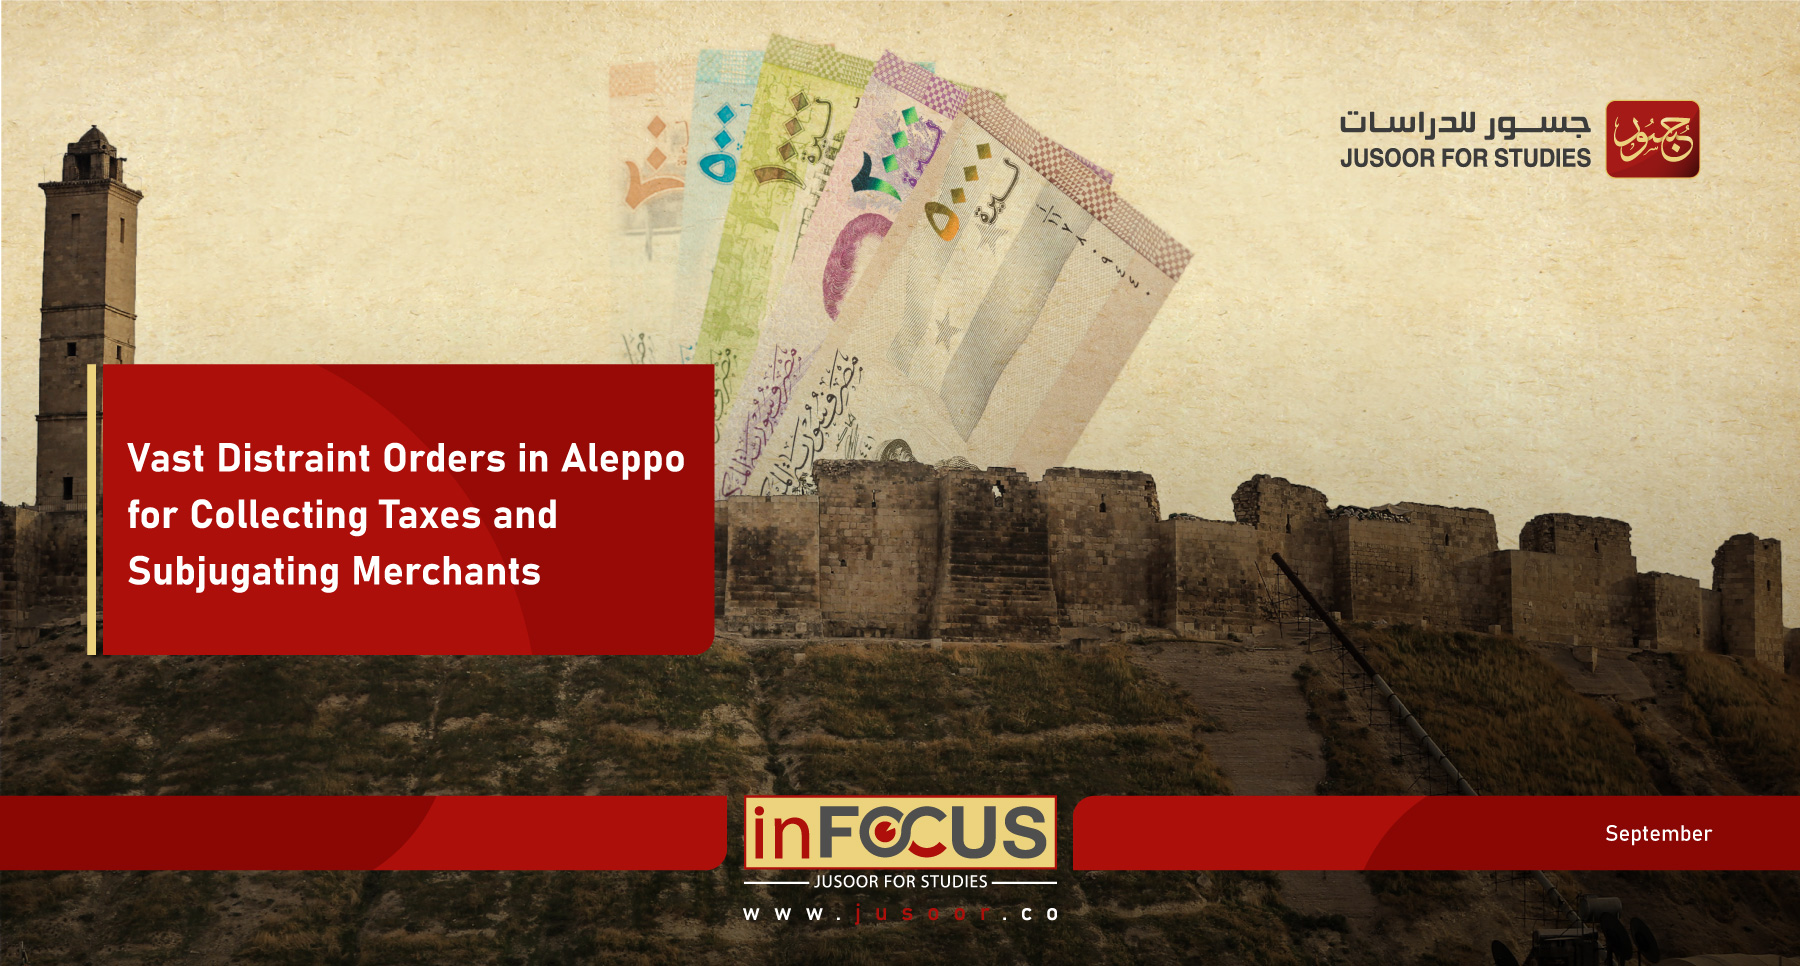 Vast Distraint Orders in Aleppo for Collecting Taxes and Subjugating Merchants 